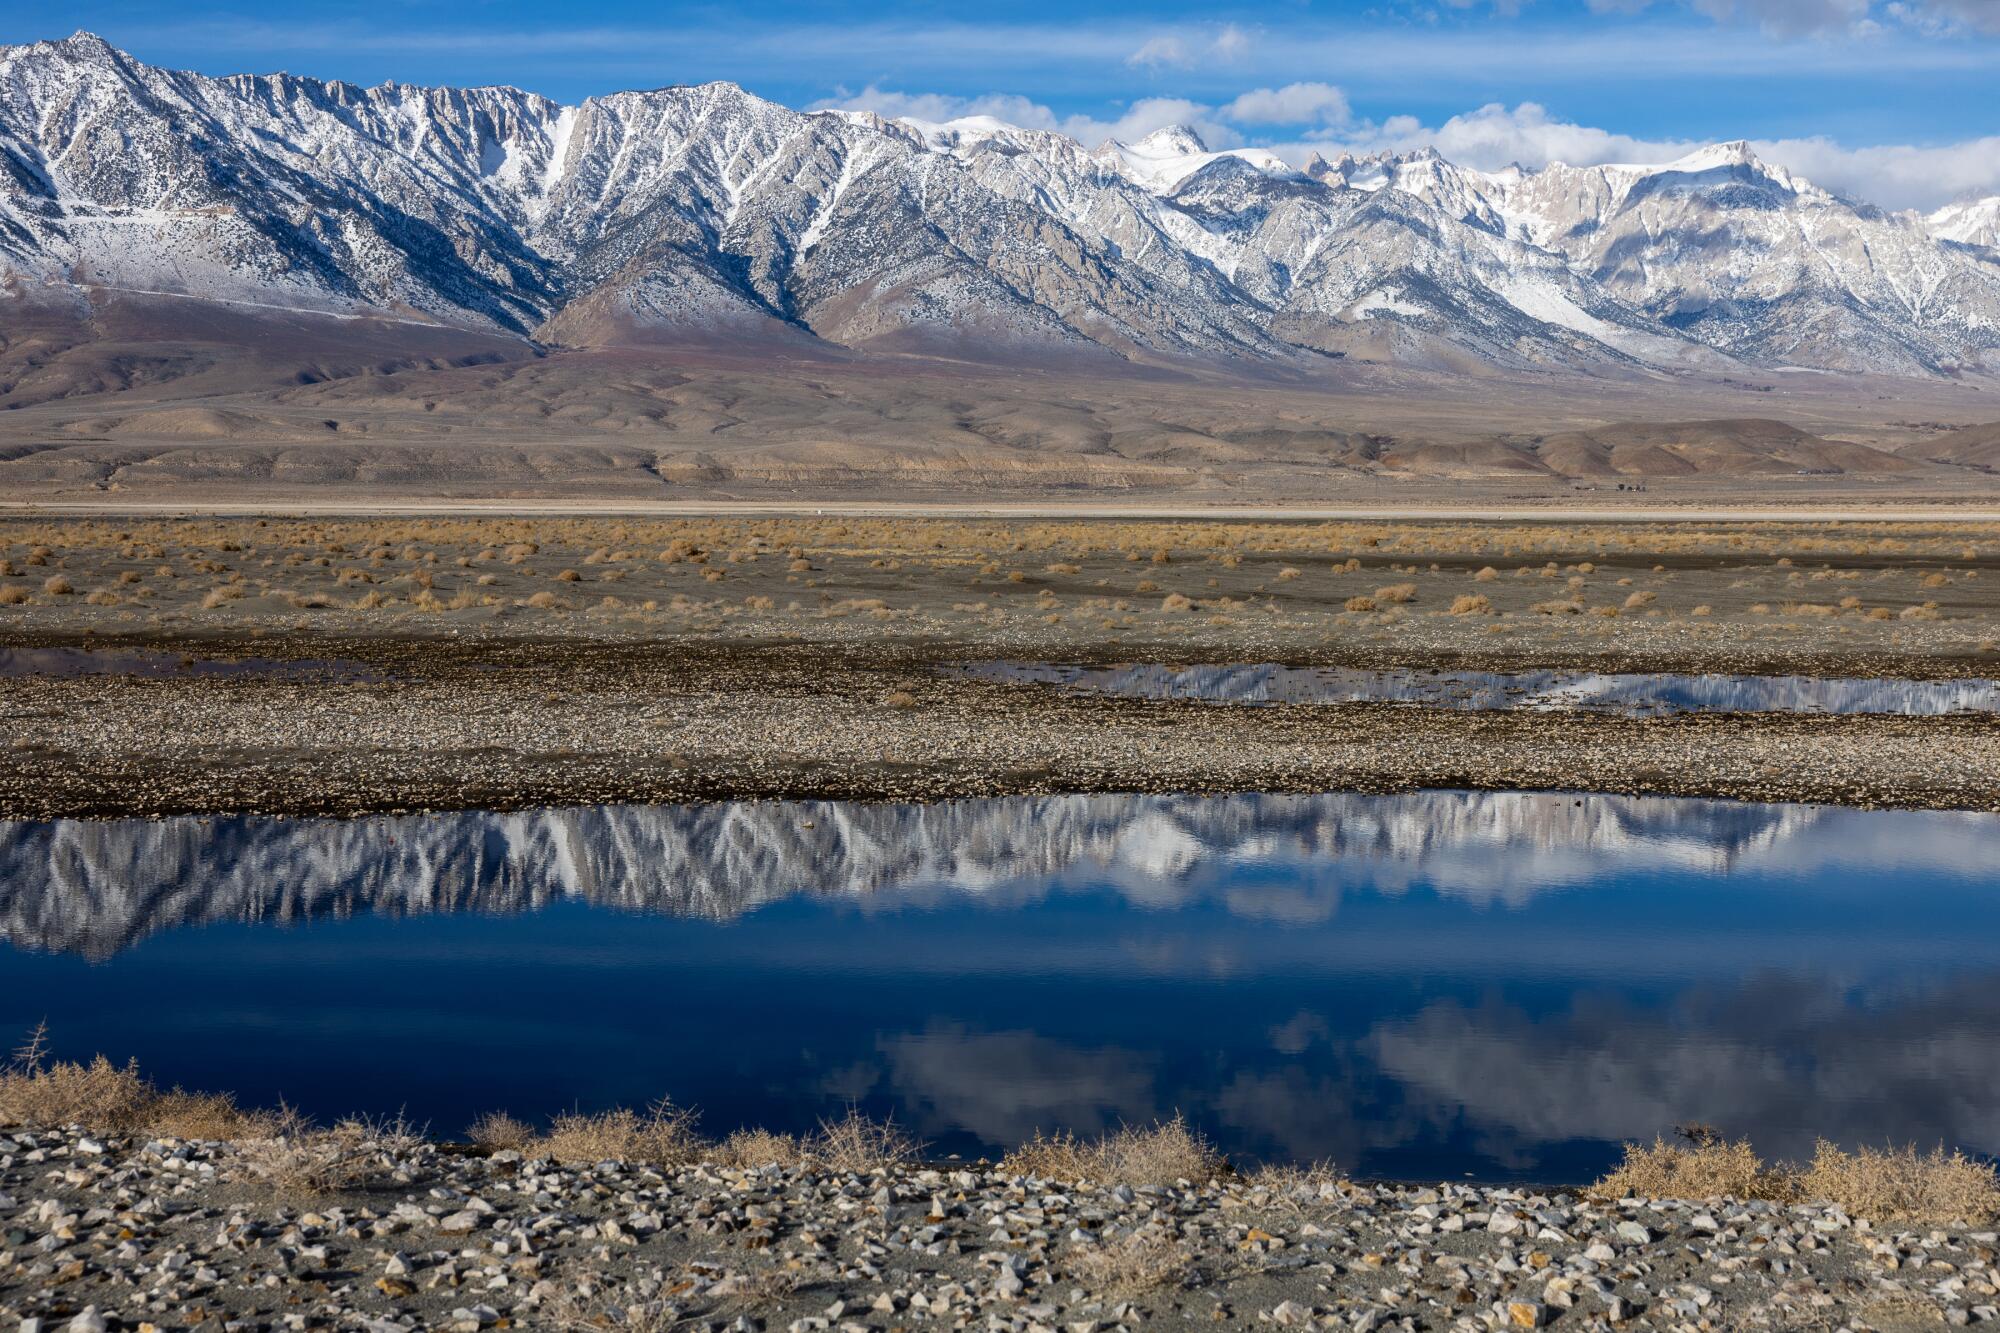 Snow-capped mountains are reflected in a pond.